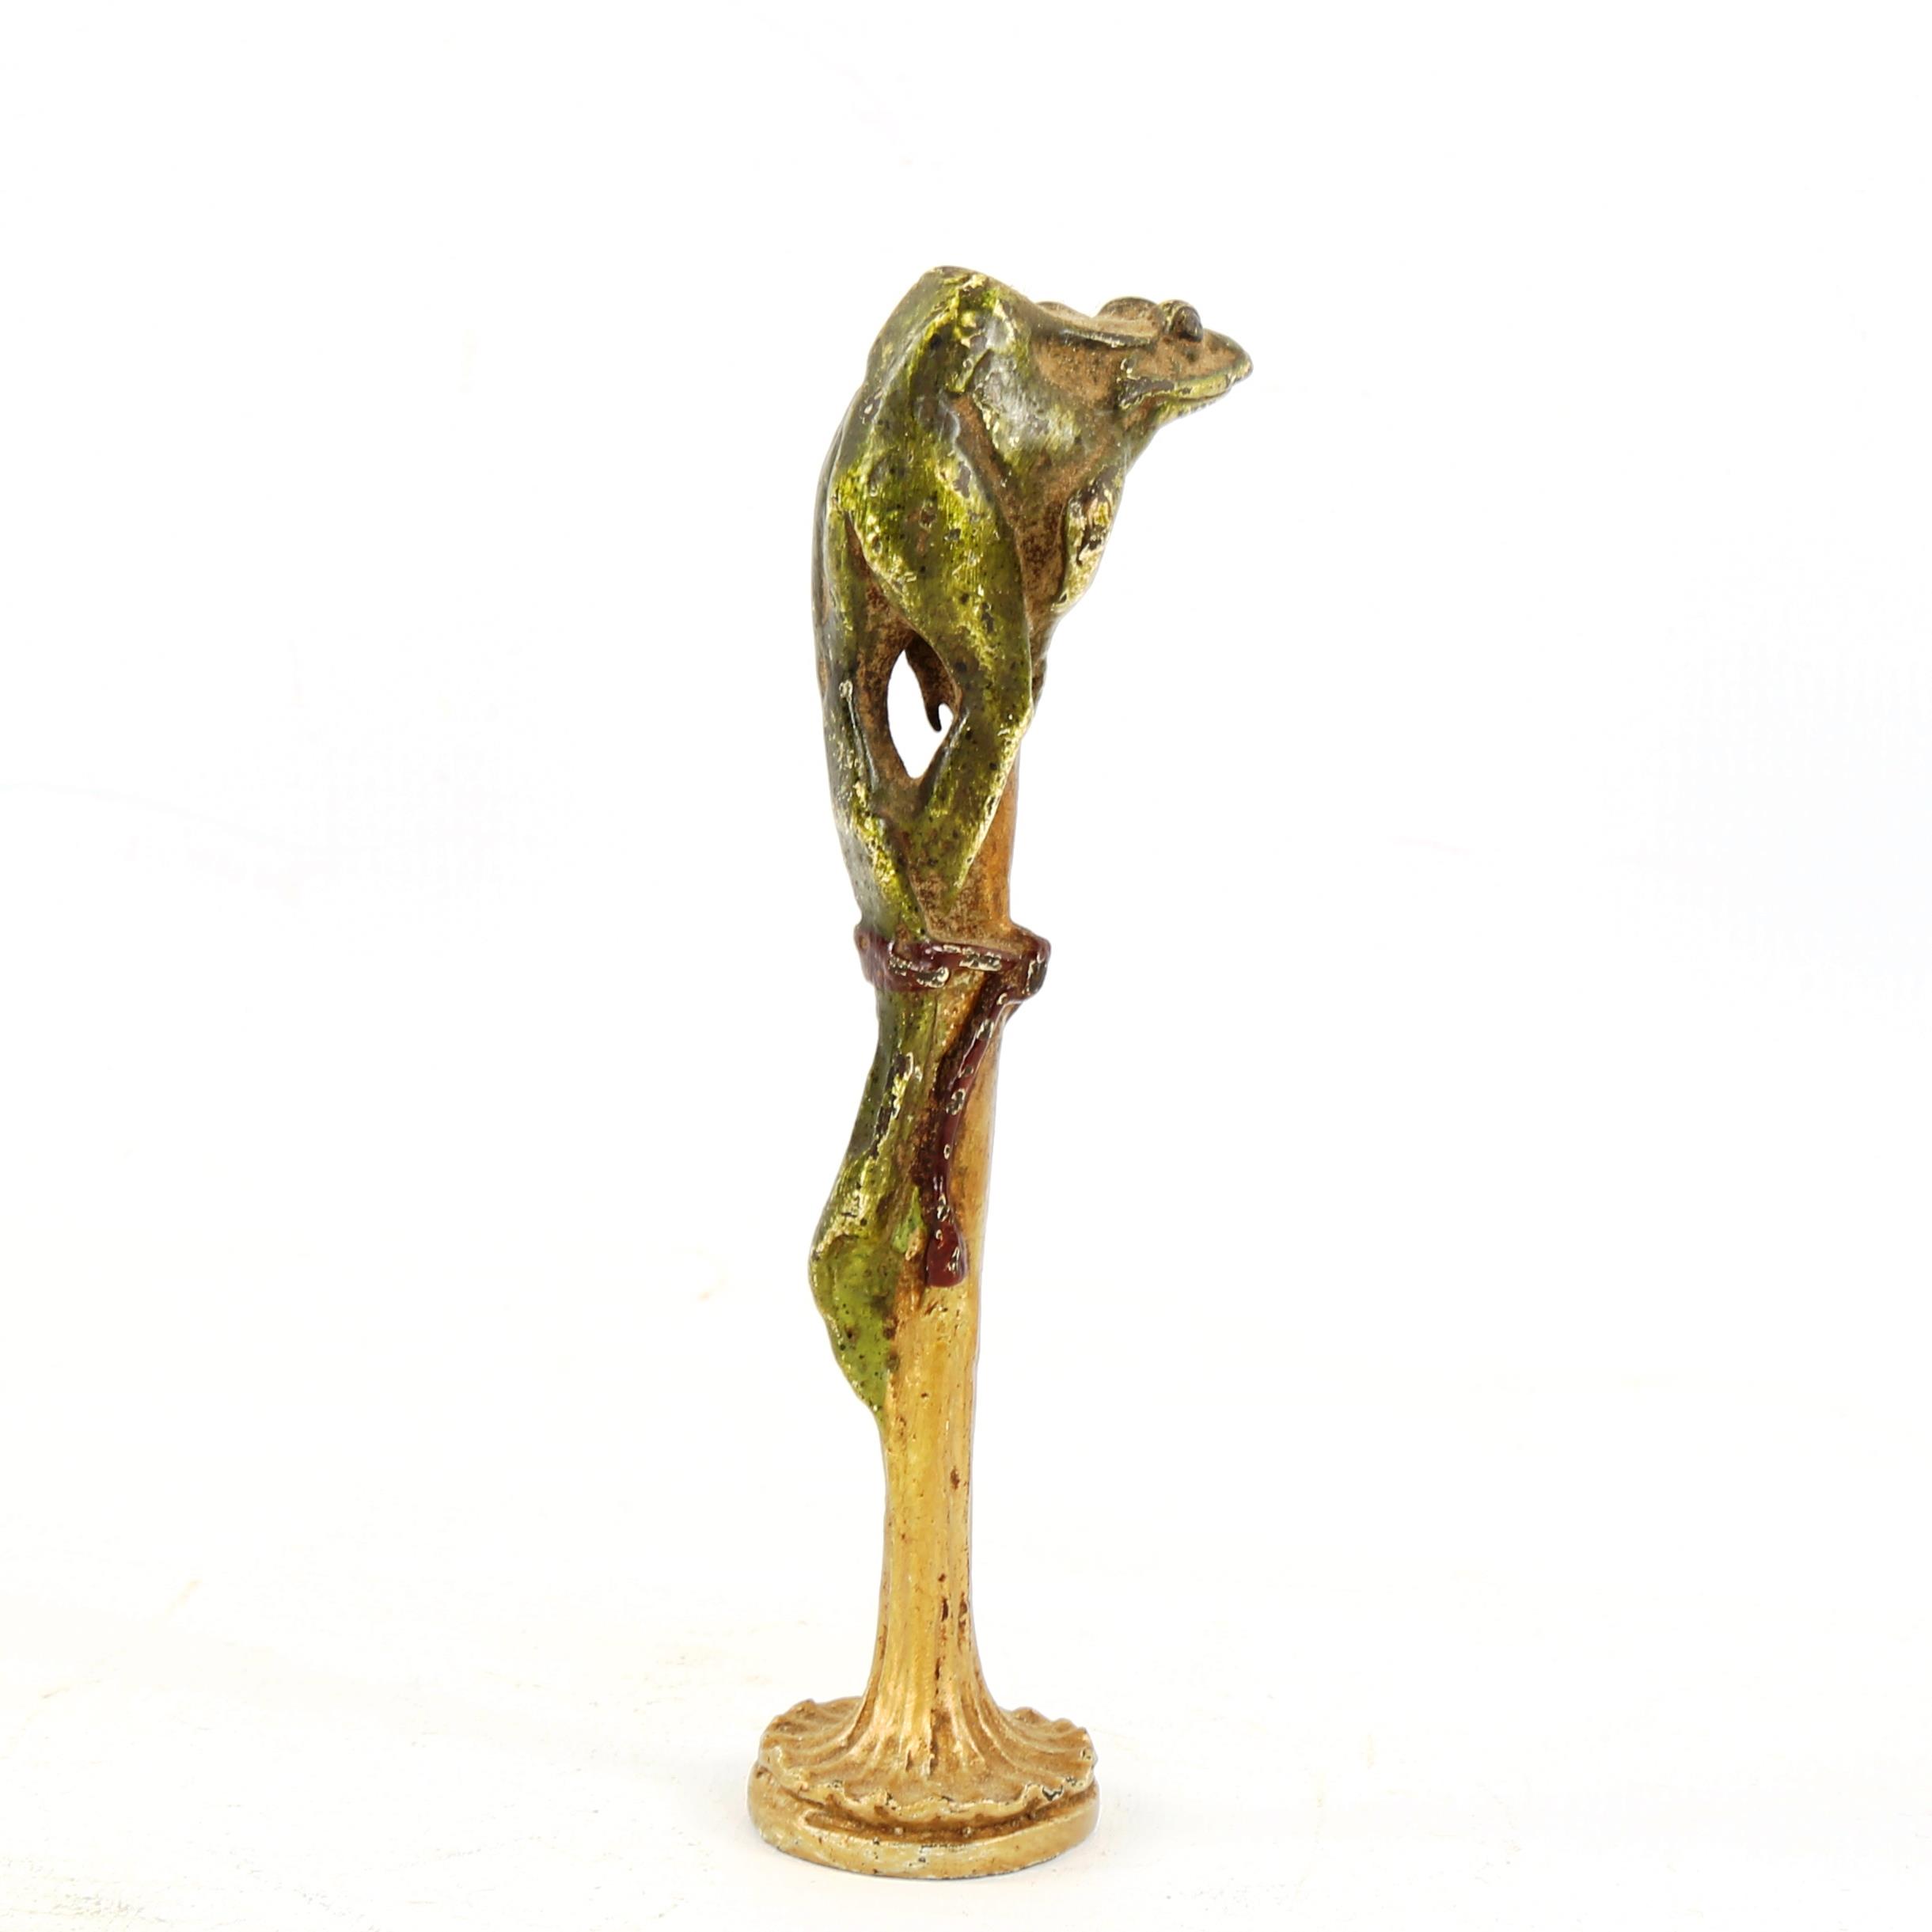 Franz Bergmann, cold painted bronze frog on a pole, height 10.5cm - Image 2 of 3